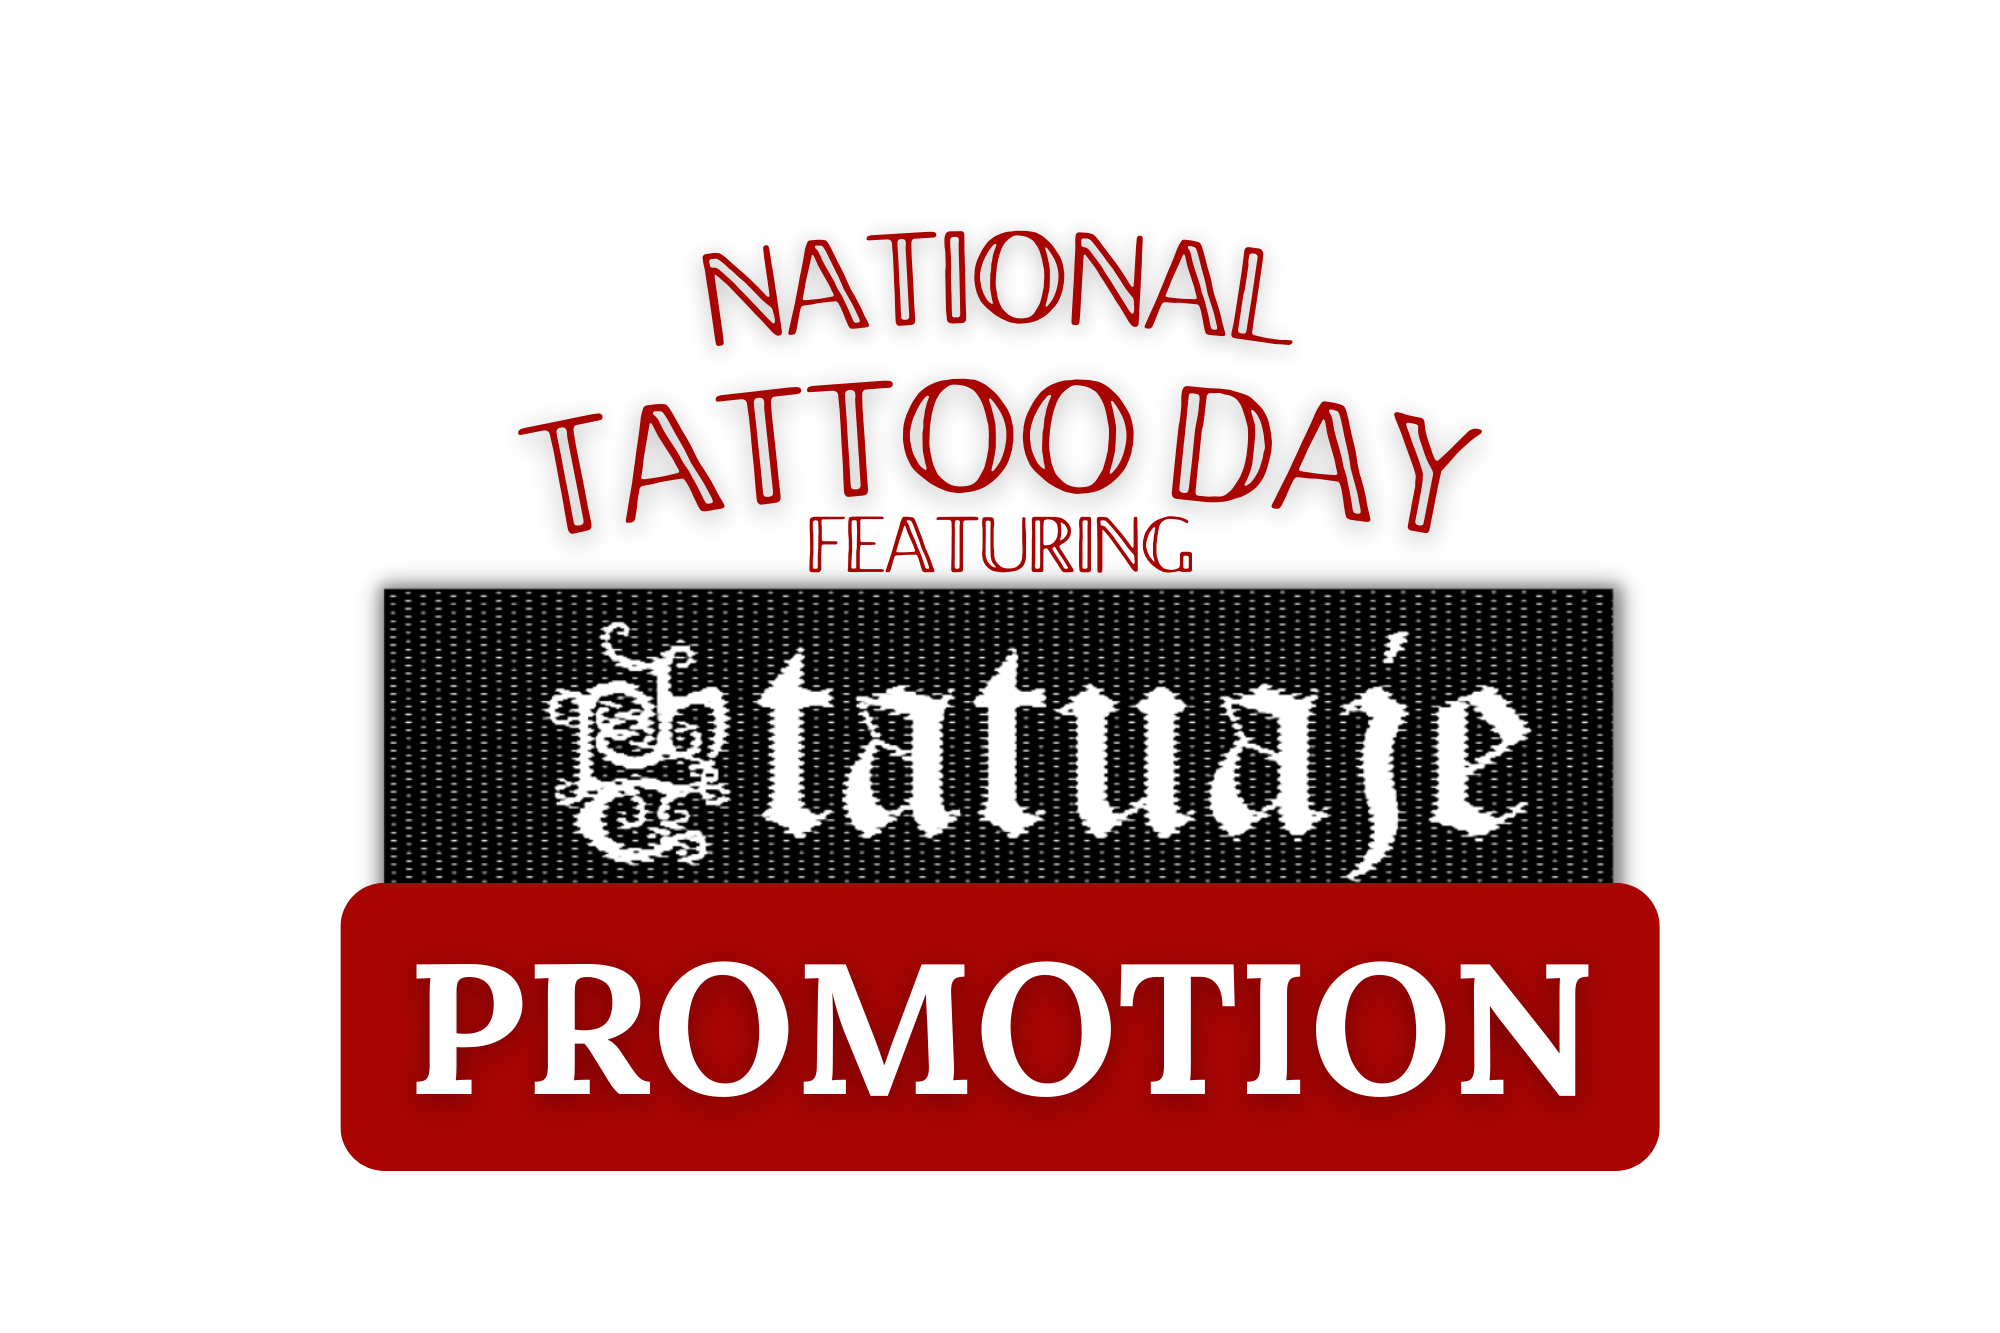 National Tattoo Day promotional event featuring Tatuaje Cigars